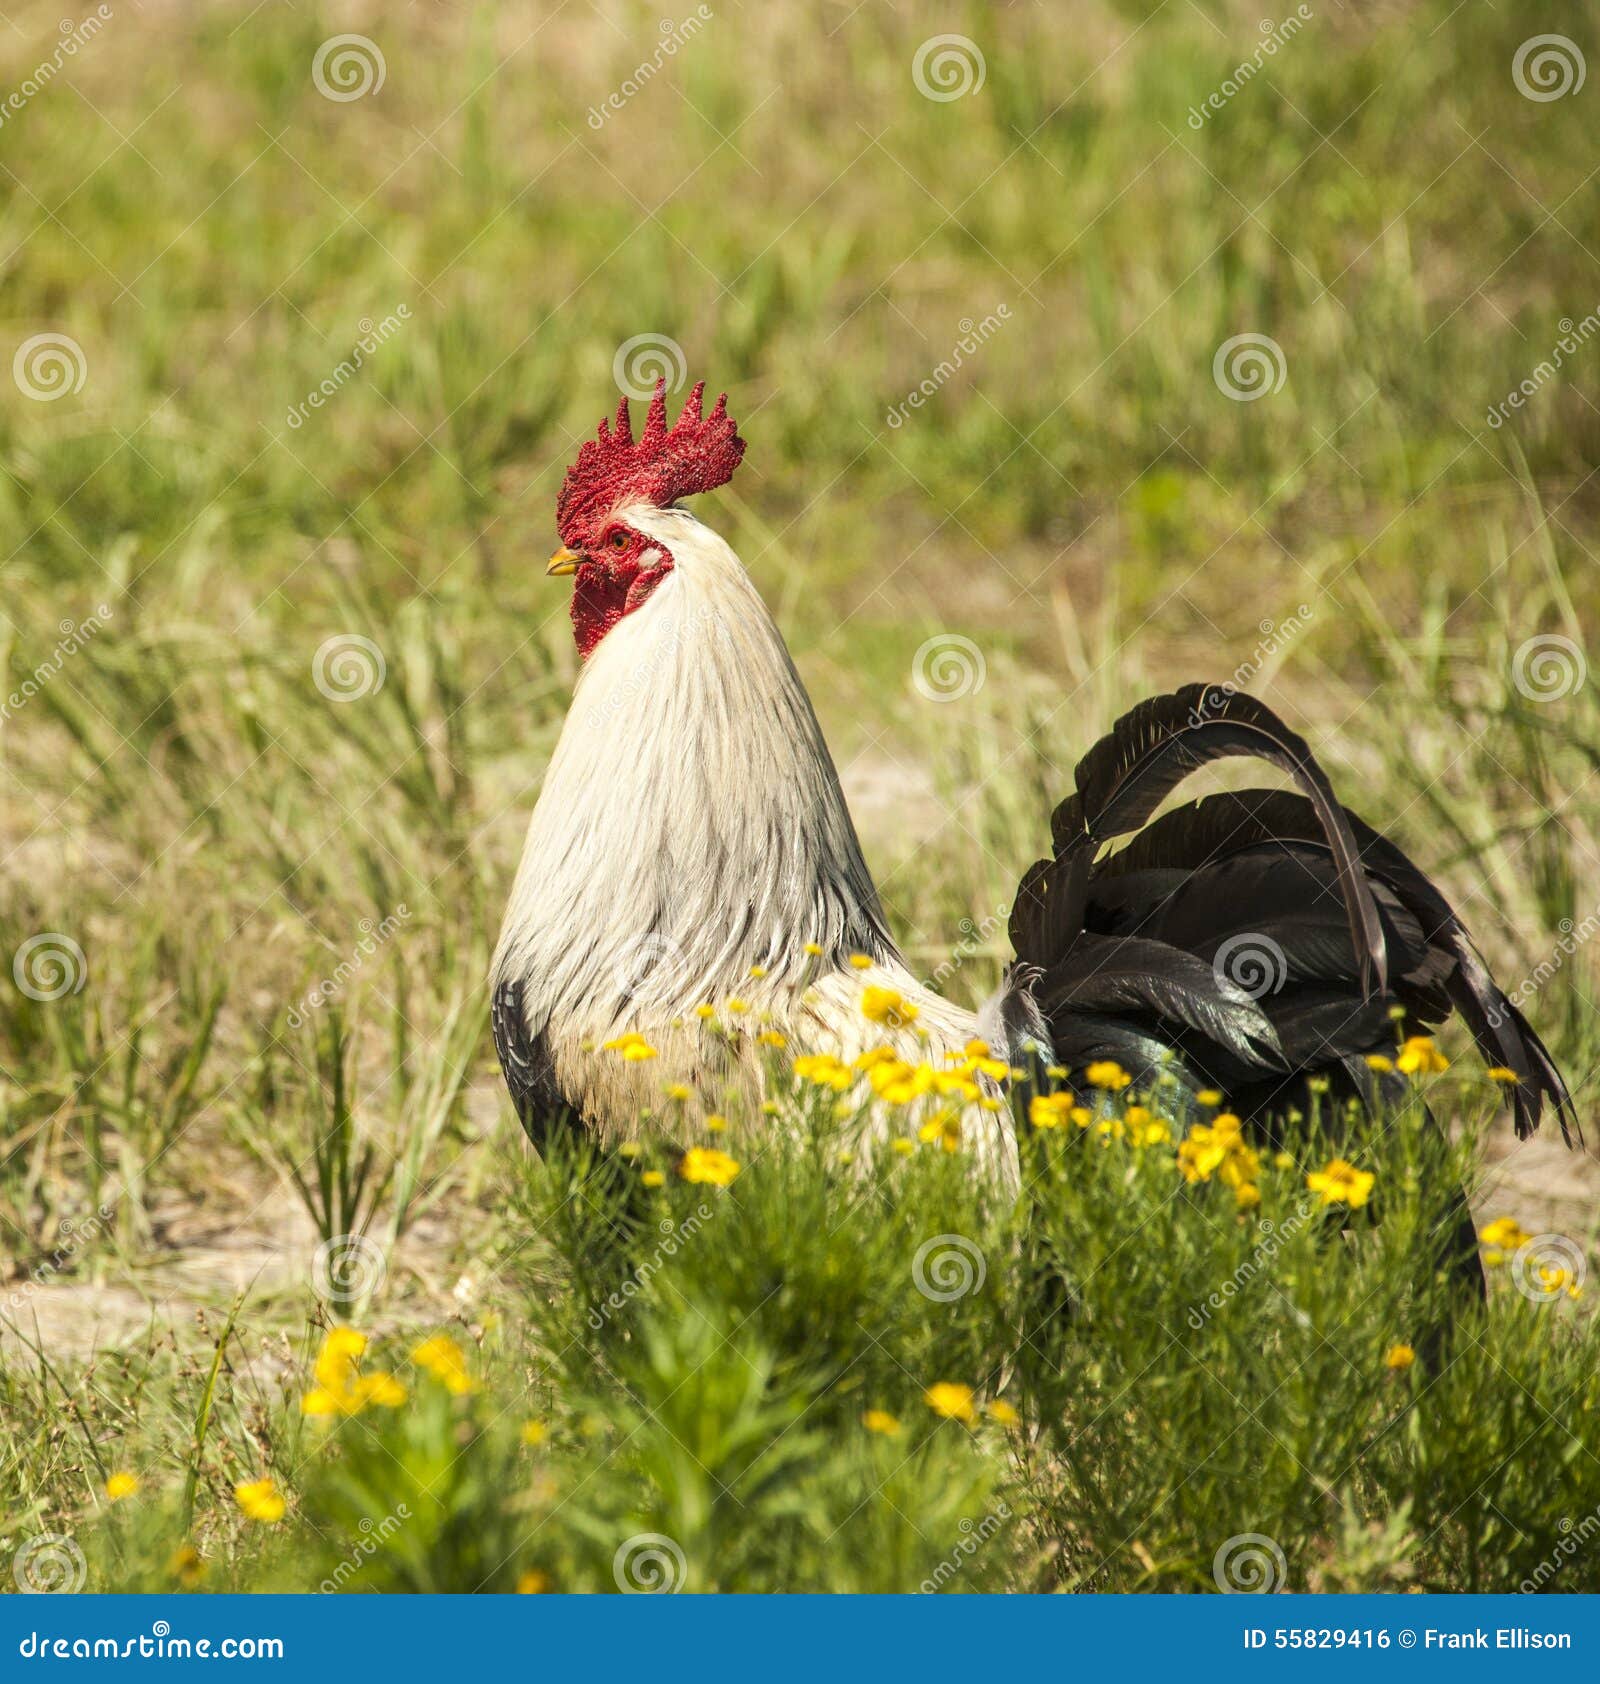 https://thumbs.dreamstime.com/z/rooster-tail-rosters-walking-around-farm-55829416.jpg